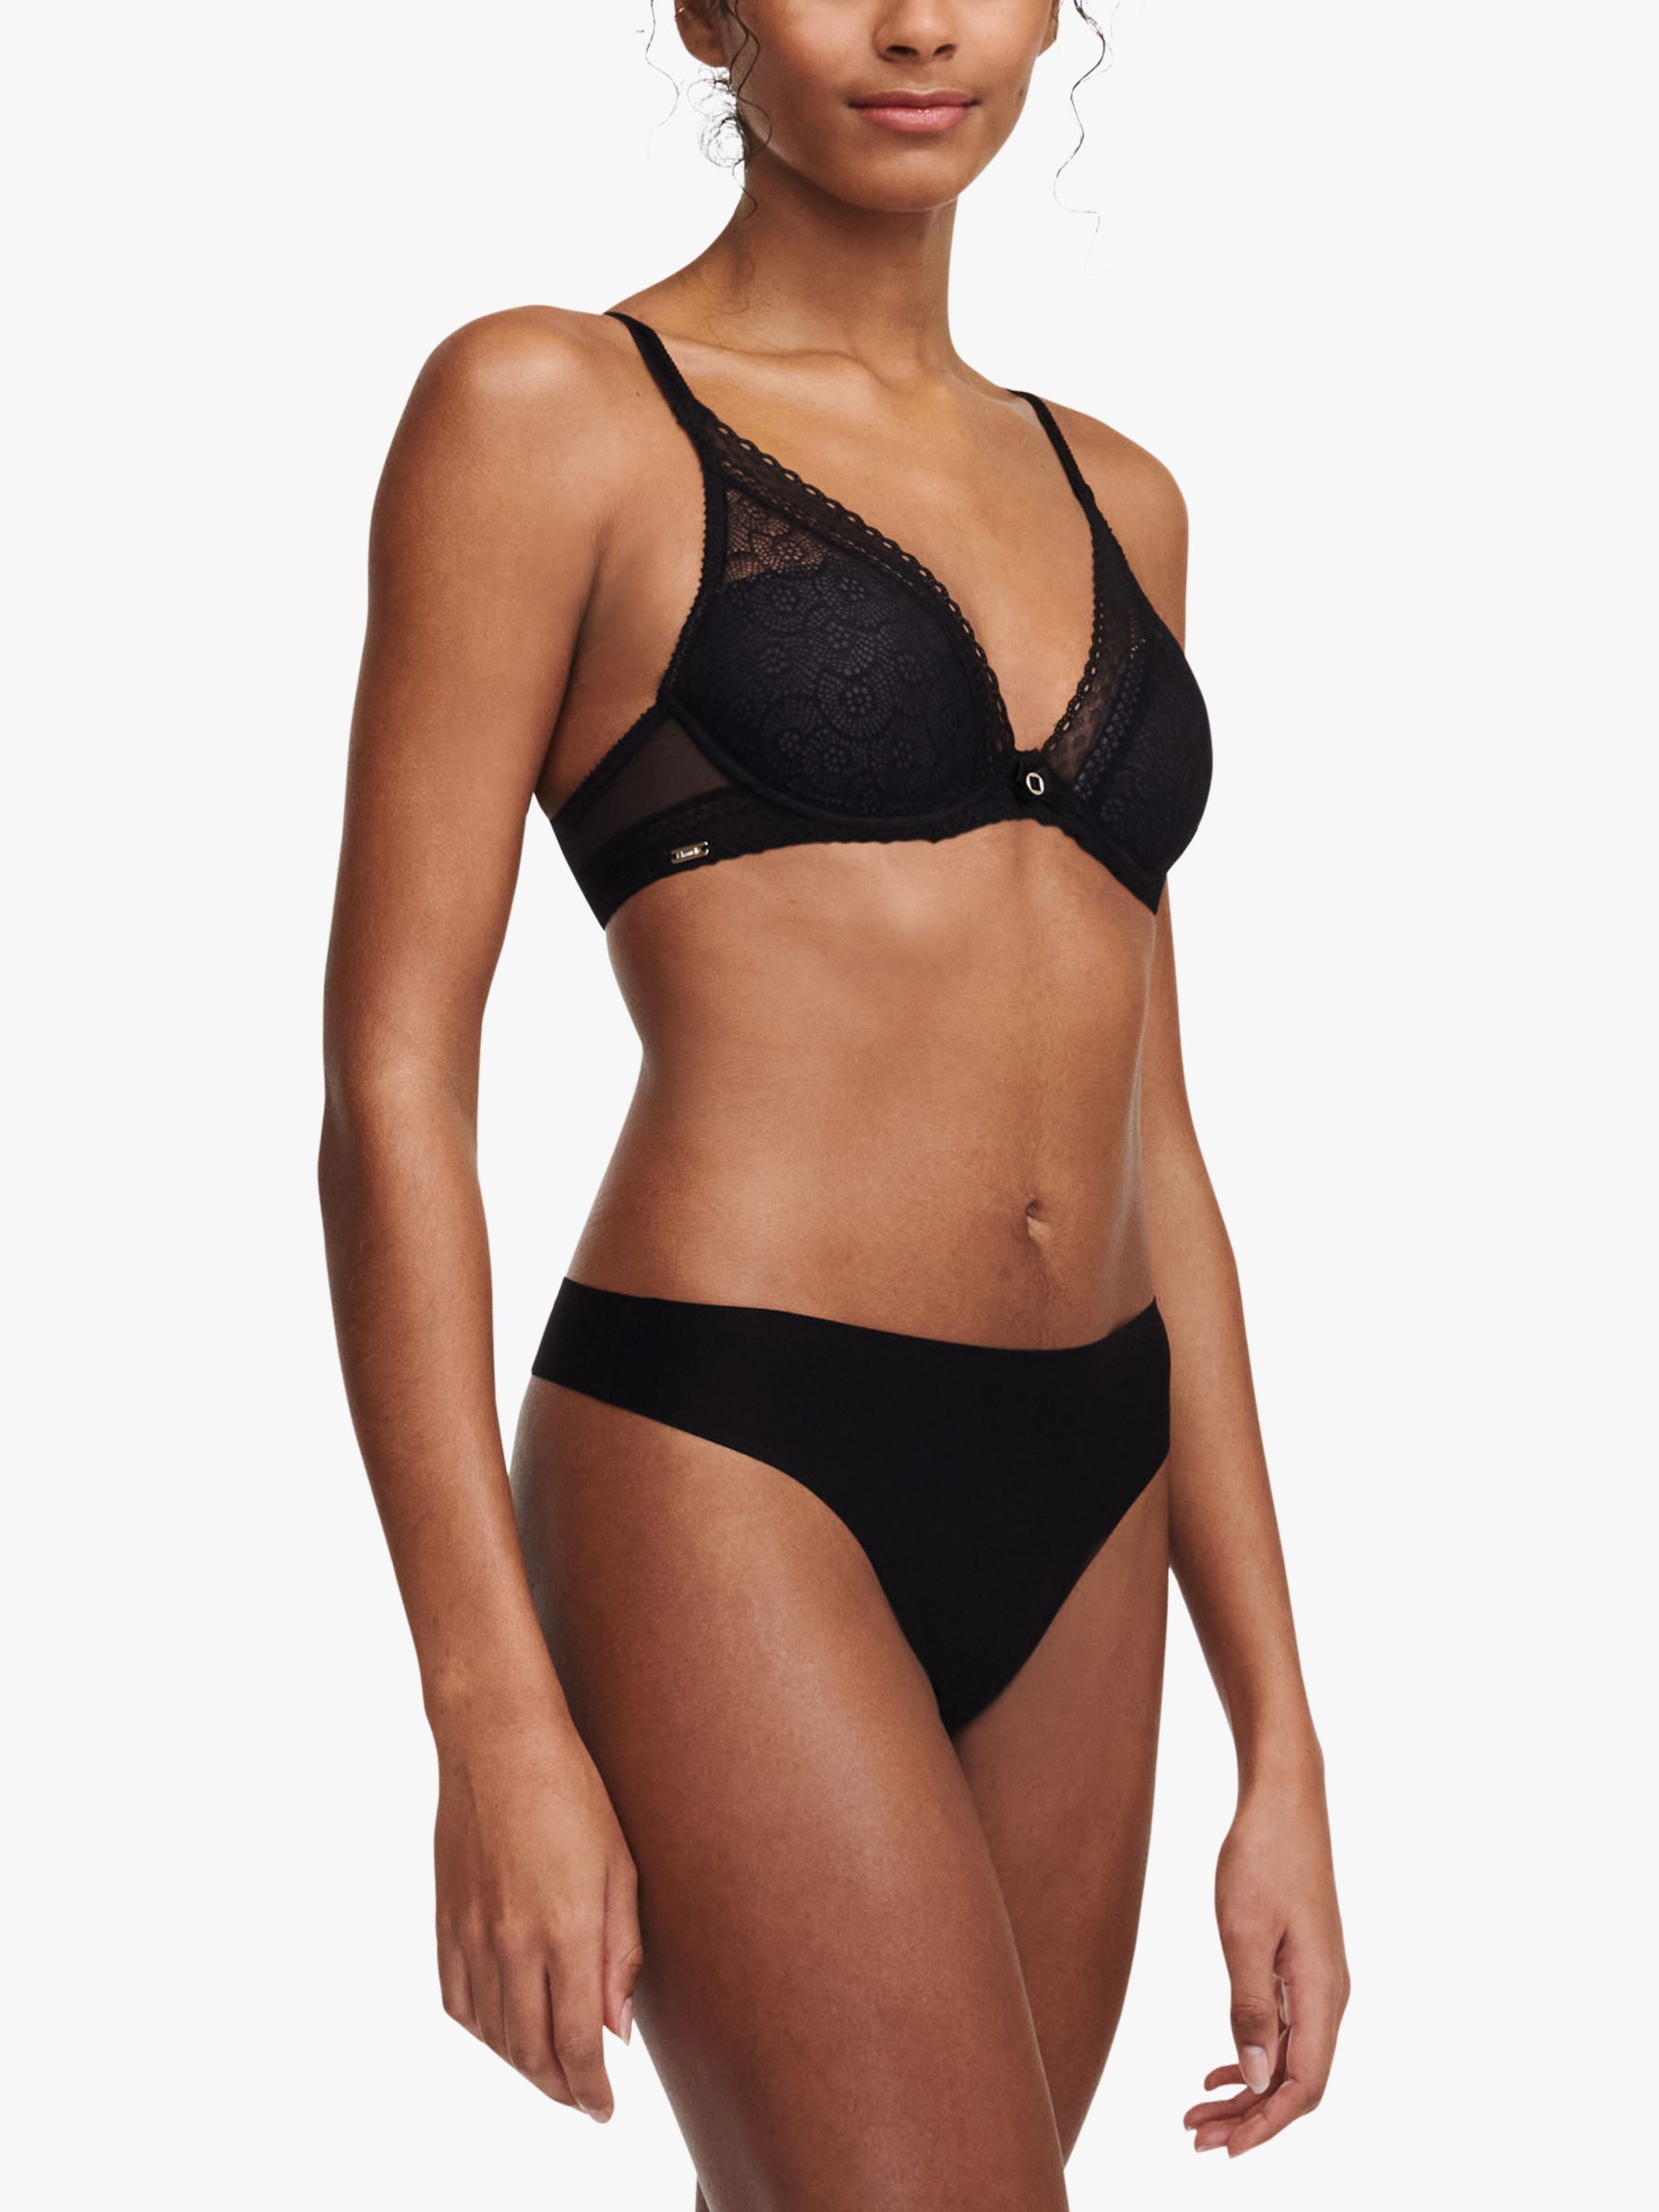 Festivité stretch-lace and tulle underwired plunge T-shirt bra